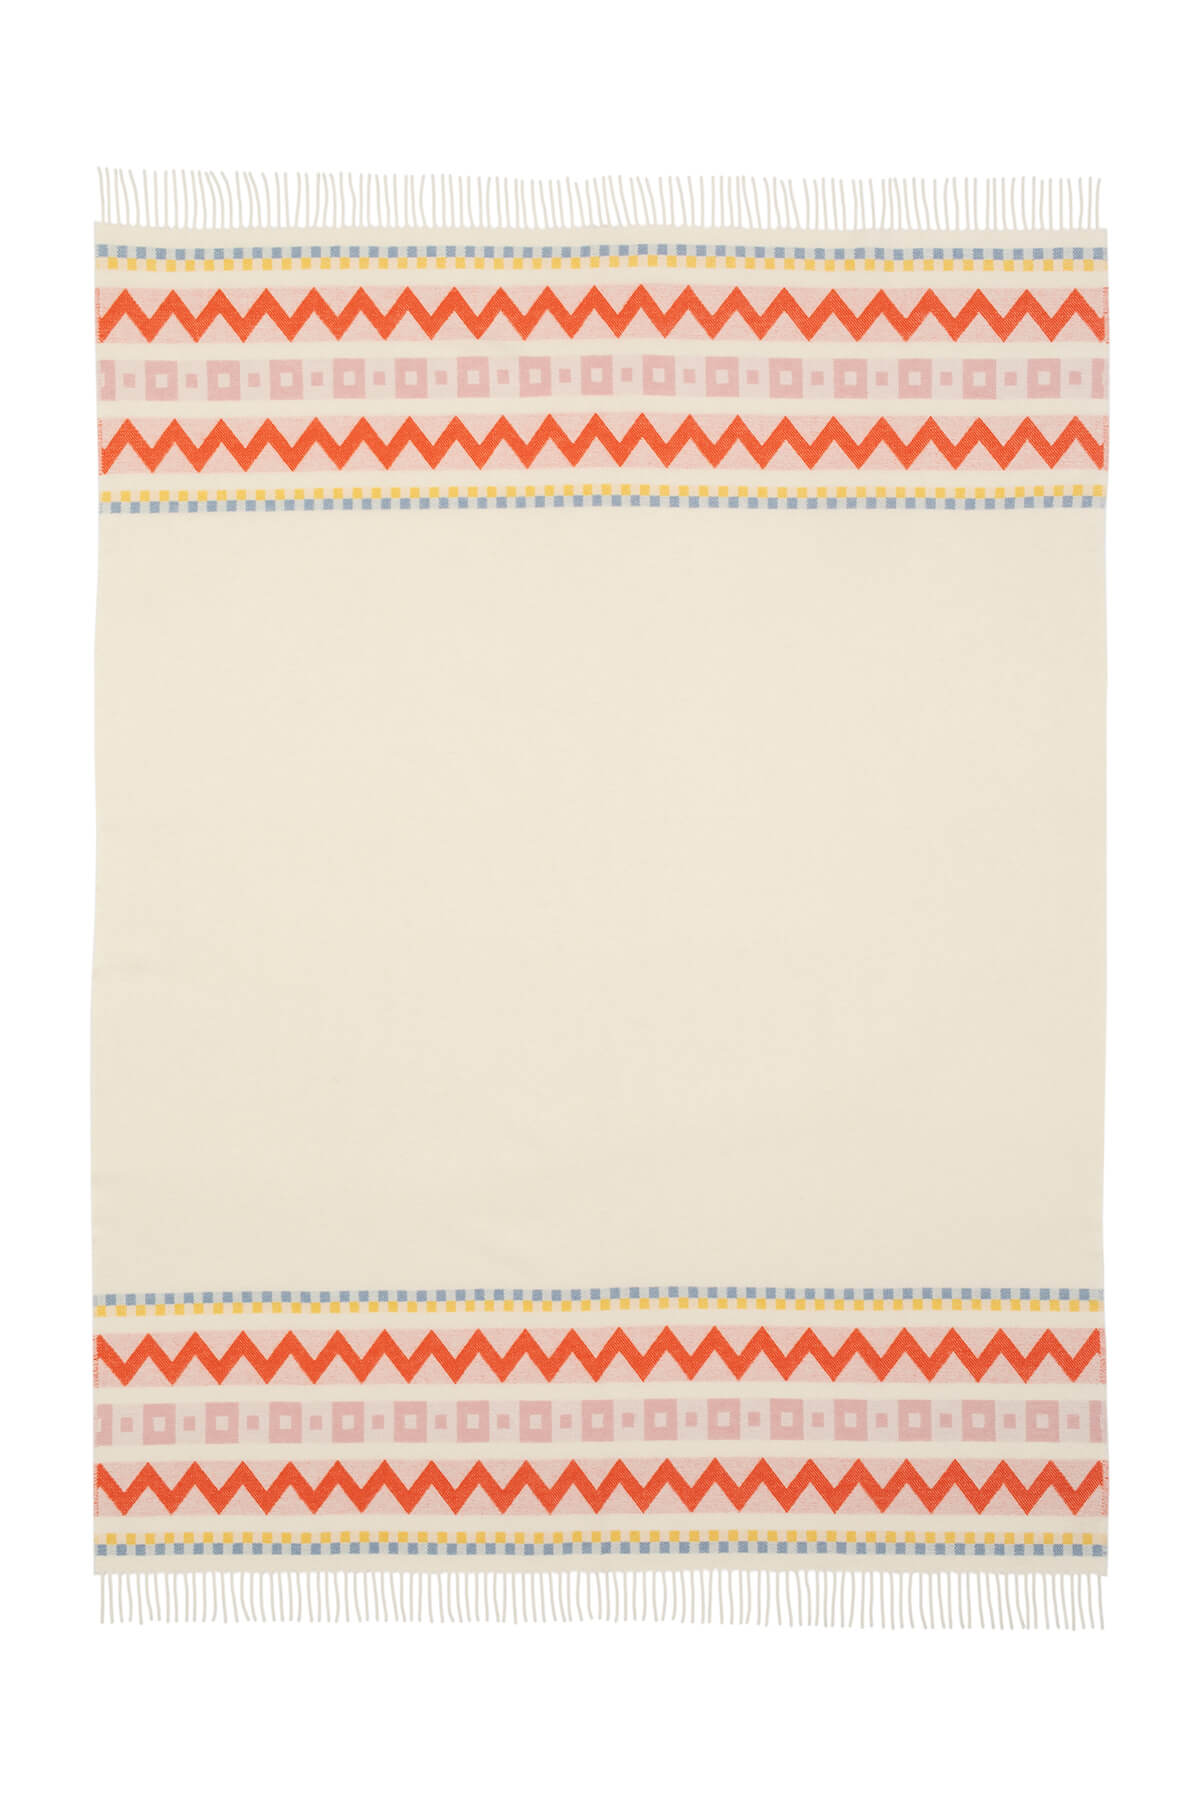 Flat Lay of  Johnstons of Elgin Children's Zig Zag Blanket in shades of pink, orange, and cream on a white back ground. WB002334RU7277ONE